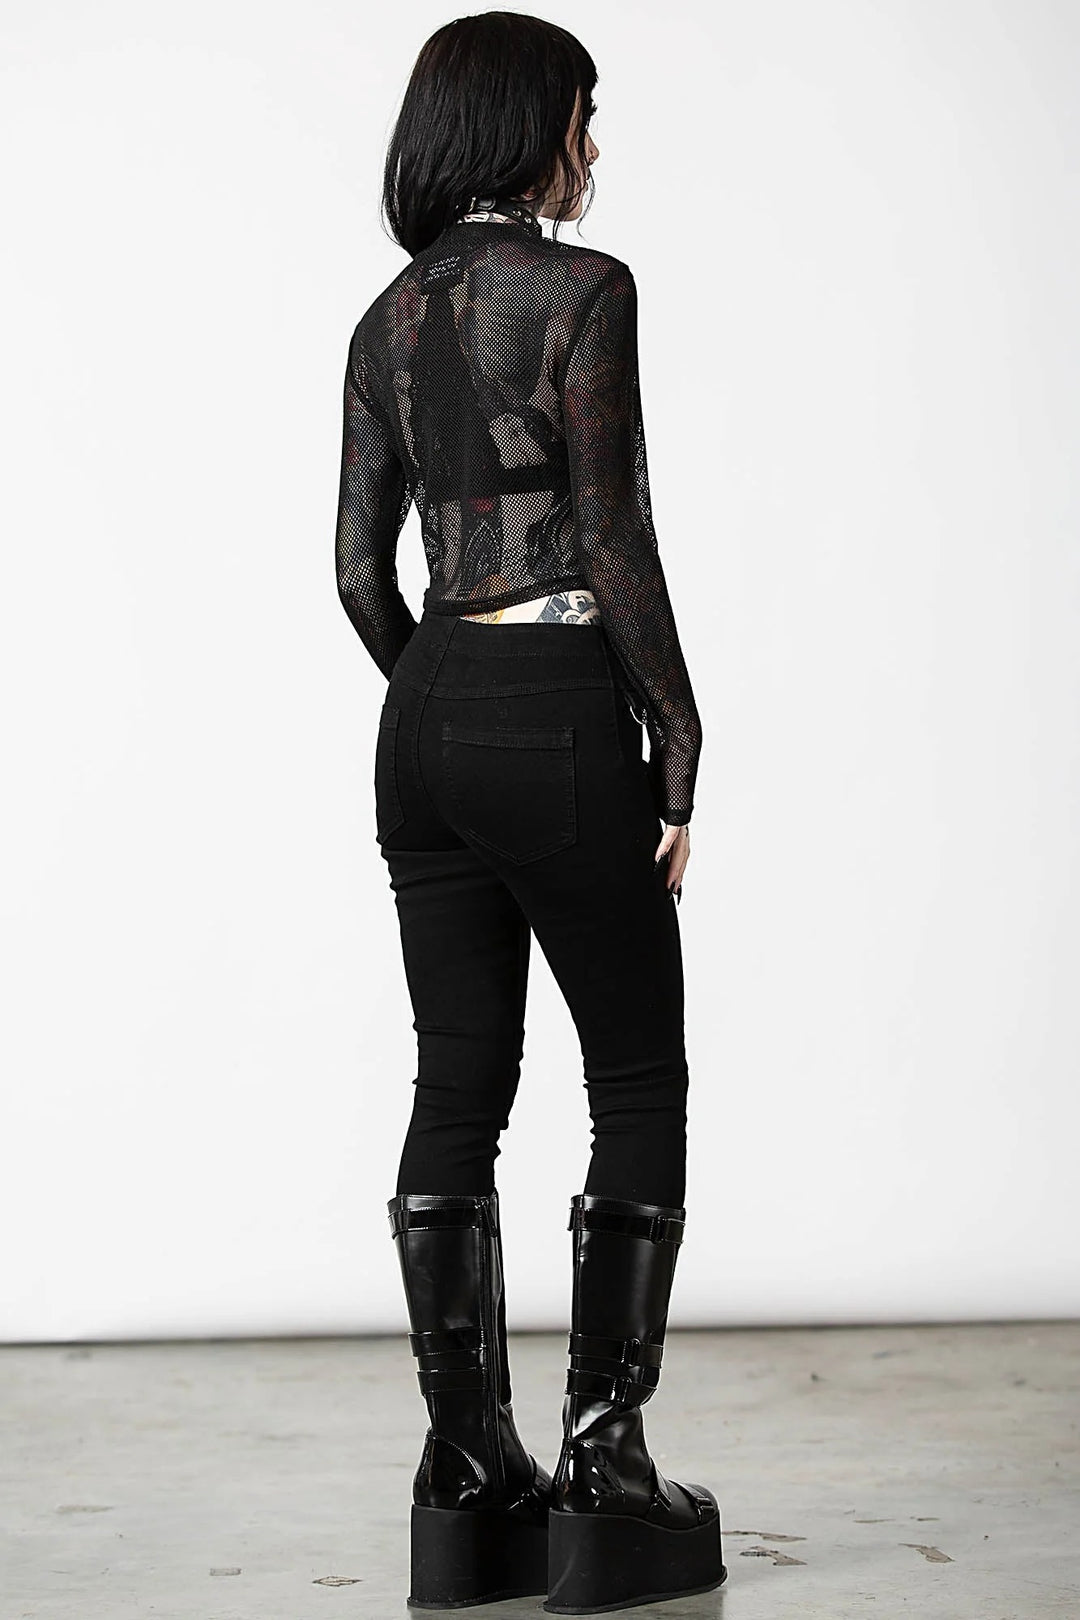 Planetary Party Mesh Top